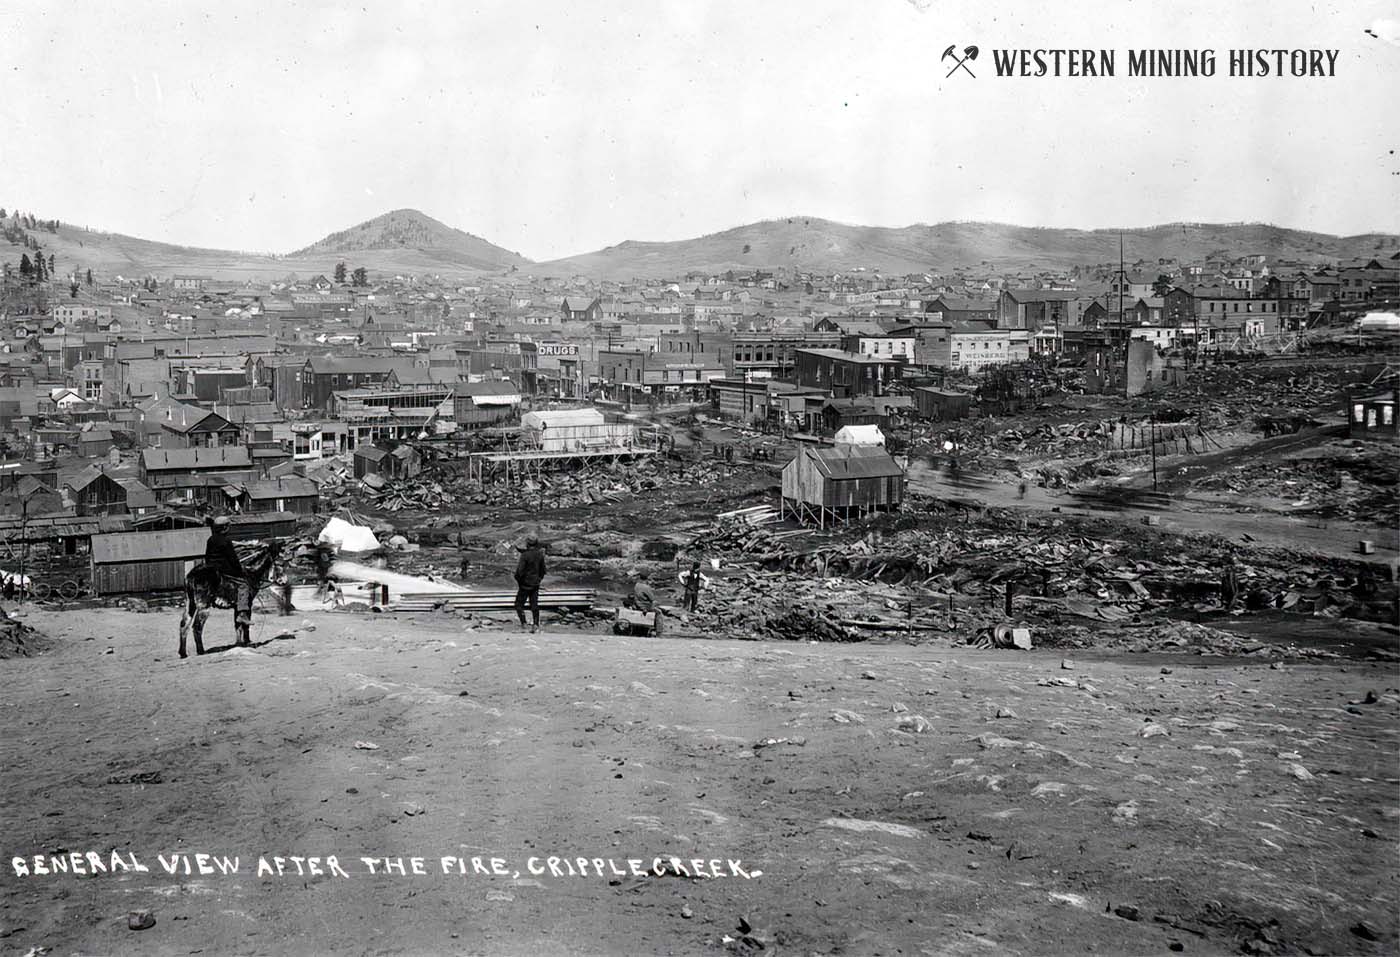 View of Cripple Creek after the April 25, 1896 fire